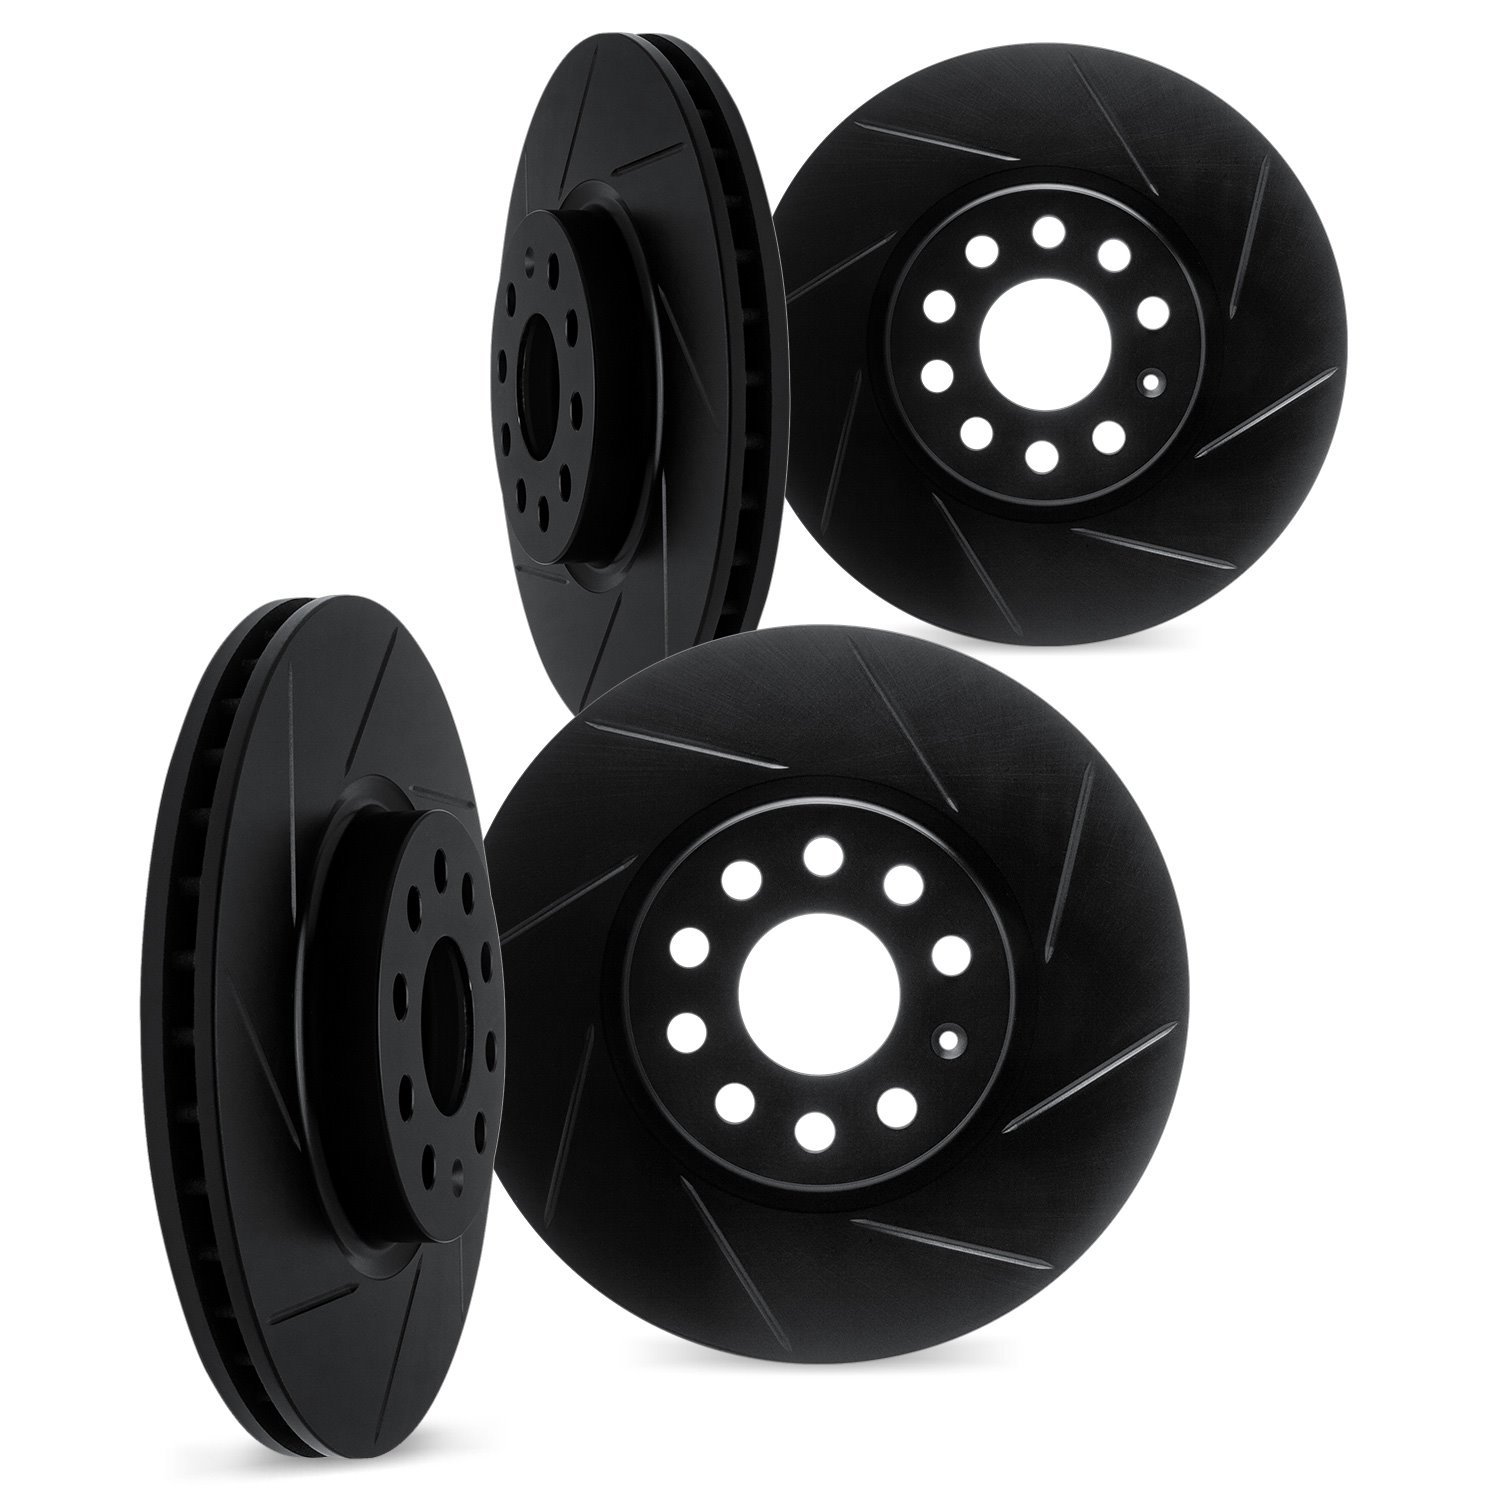 3004-31037 Slotted Brake Rotors [Black], Fits Select Multiple Makes/Models, Position: Front and Rear